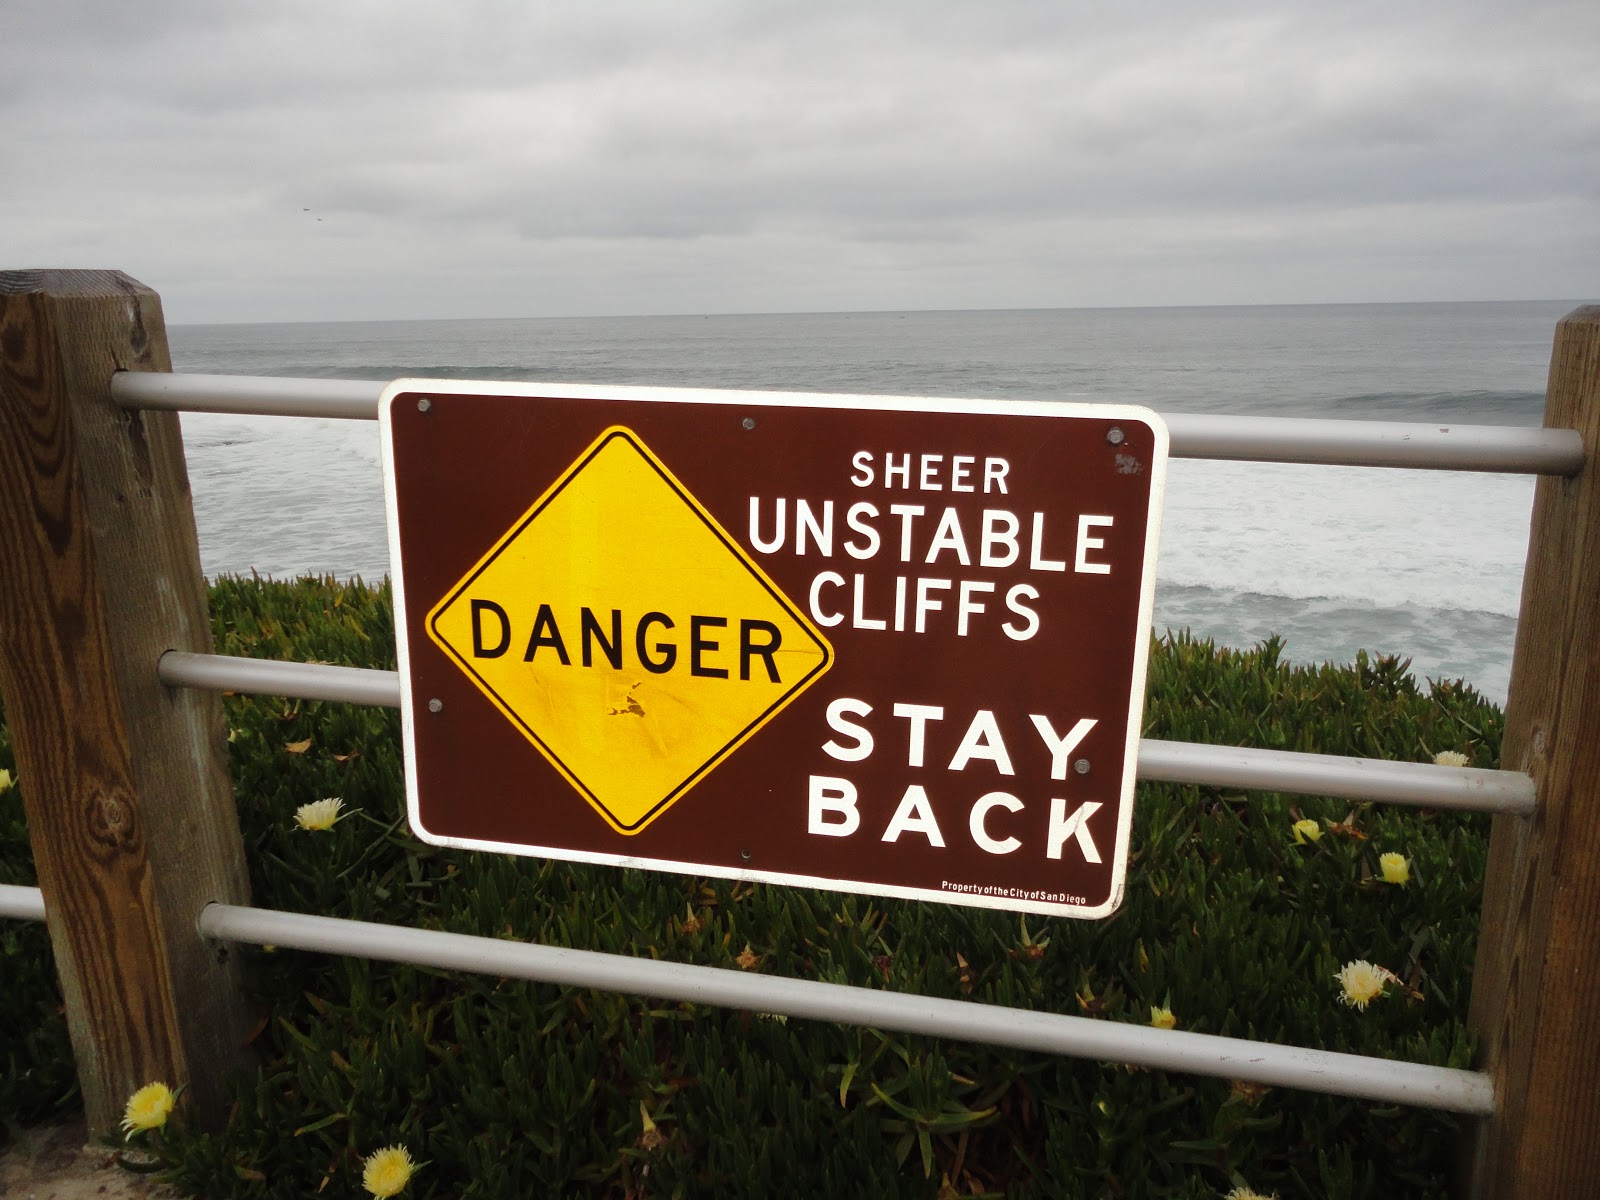 Sign says SHEER UNSTABLE CLIFFS STAY BACK